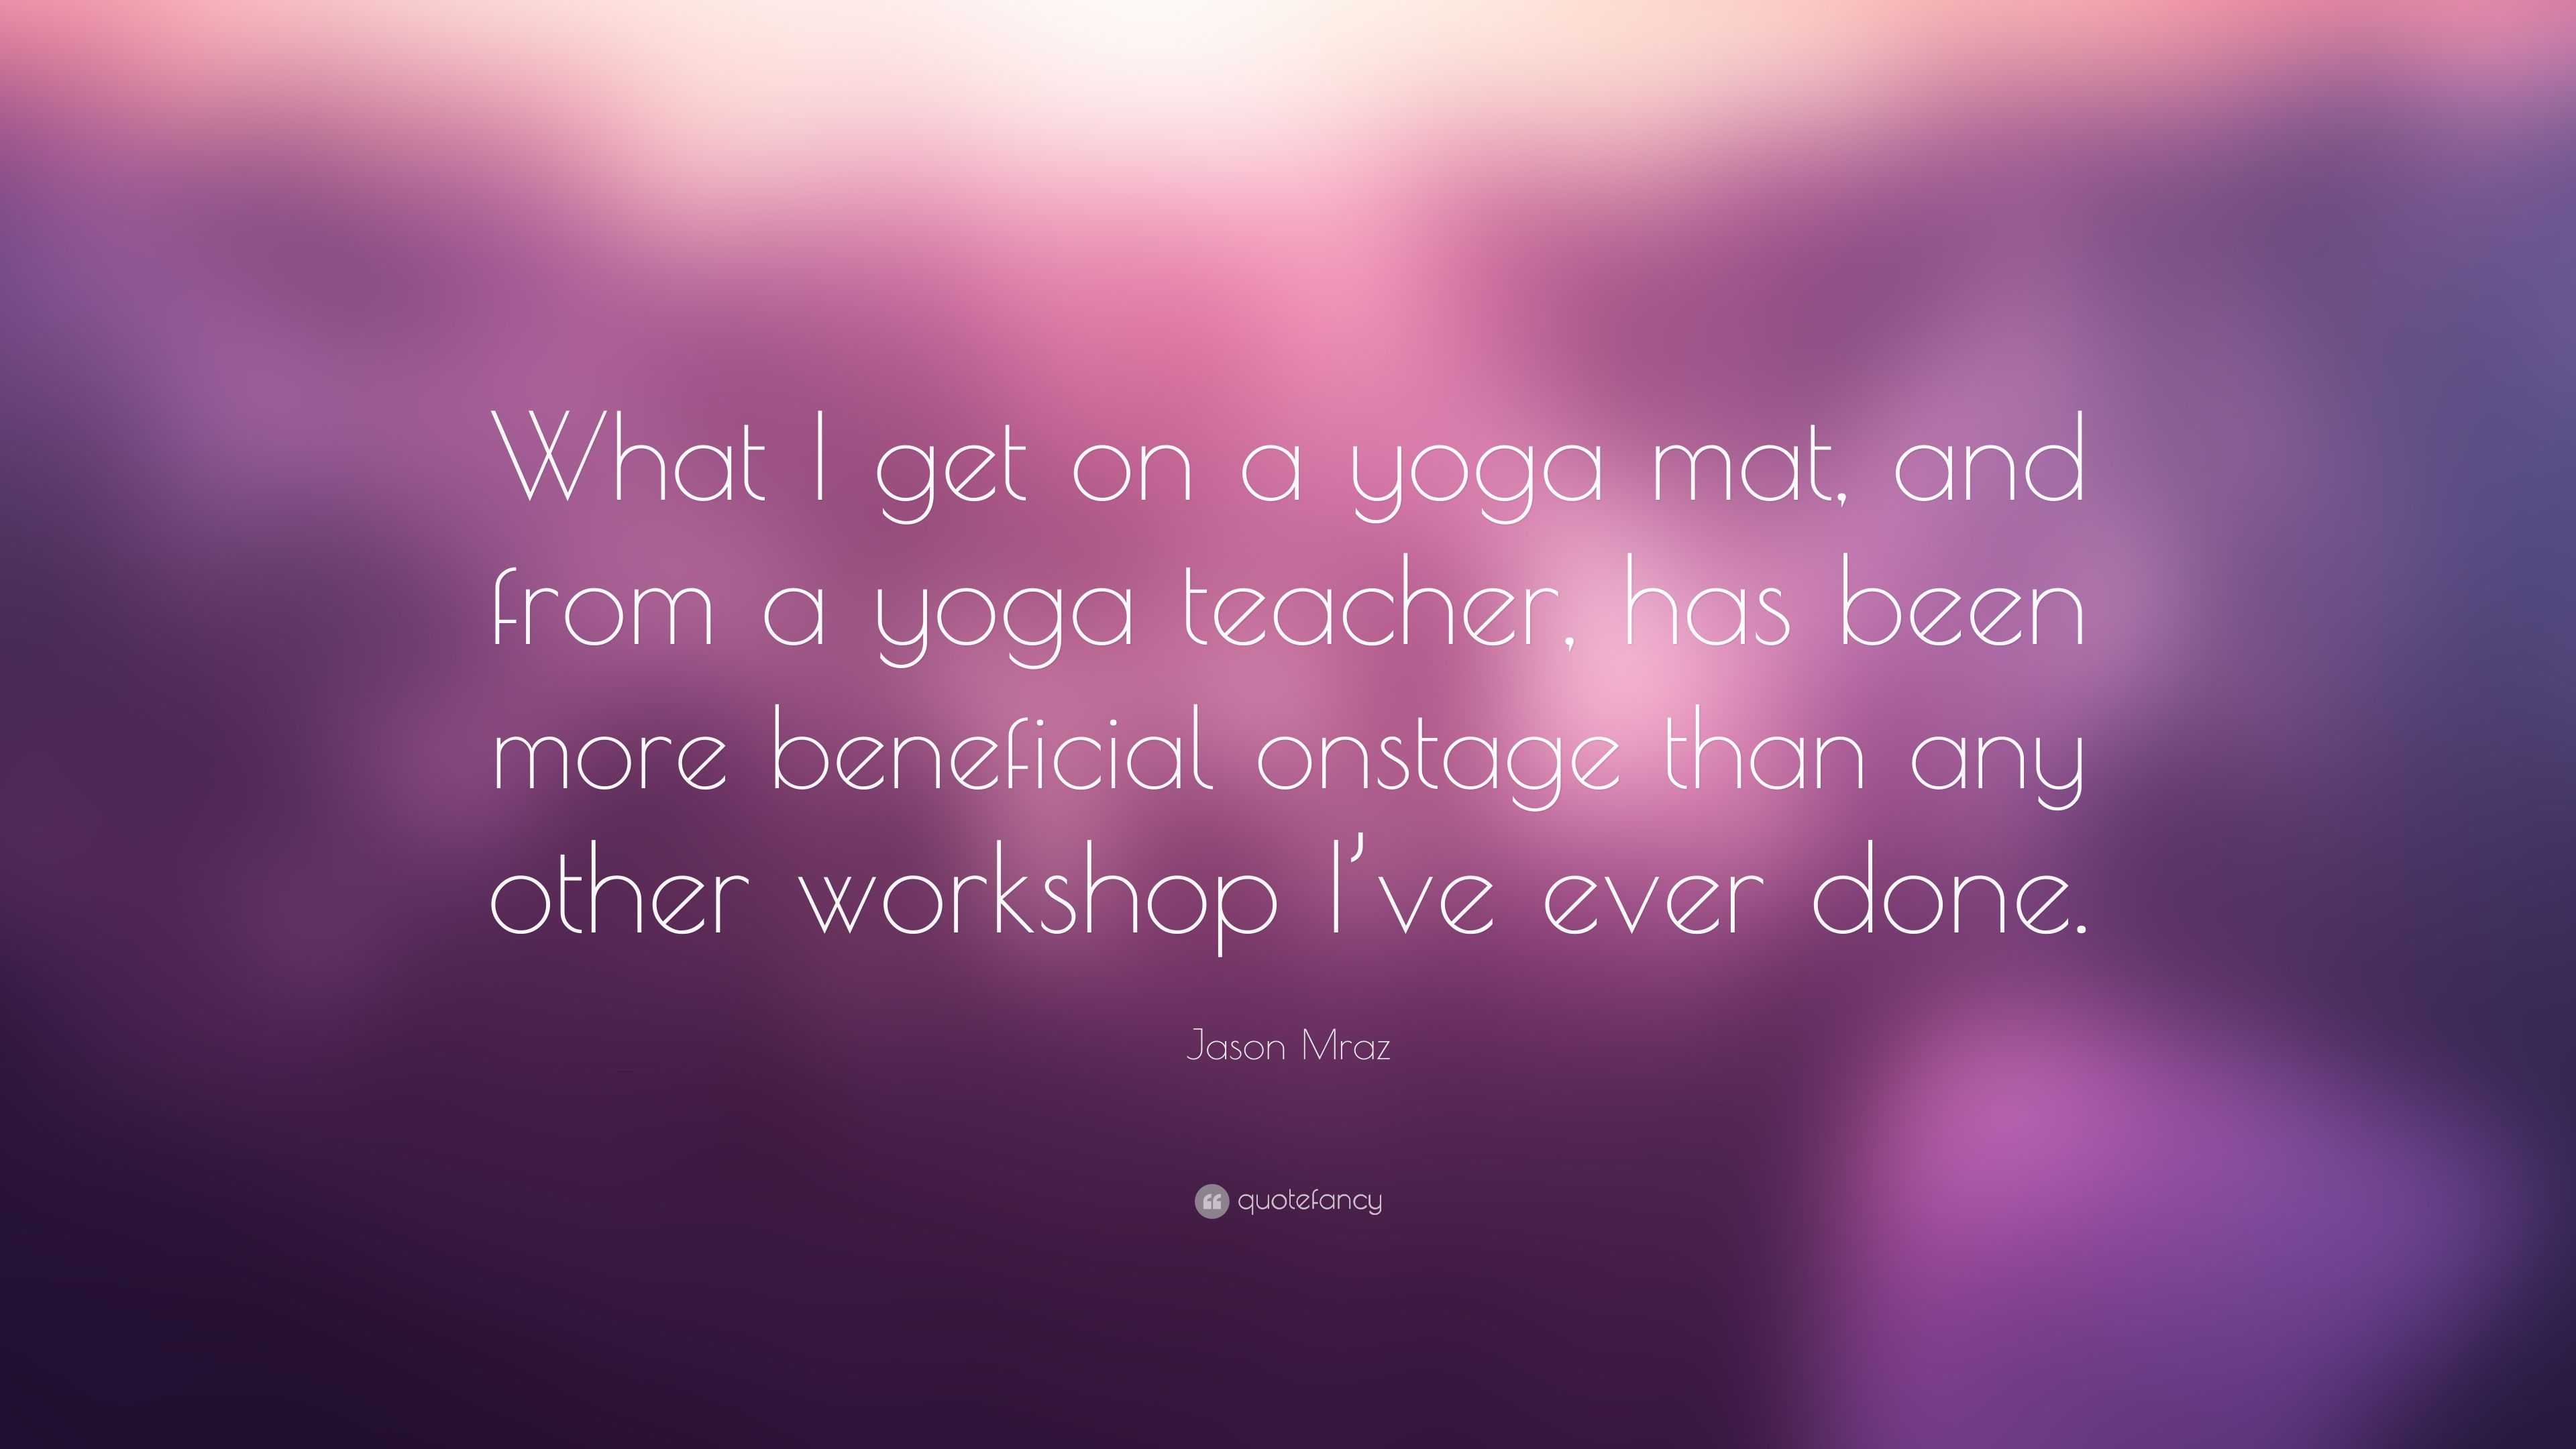 Adventures of a Yoga Teacher: A Journal of Quotes